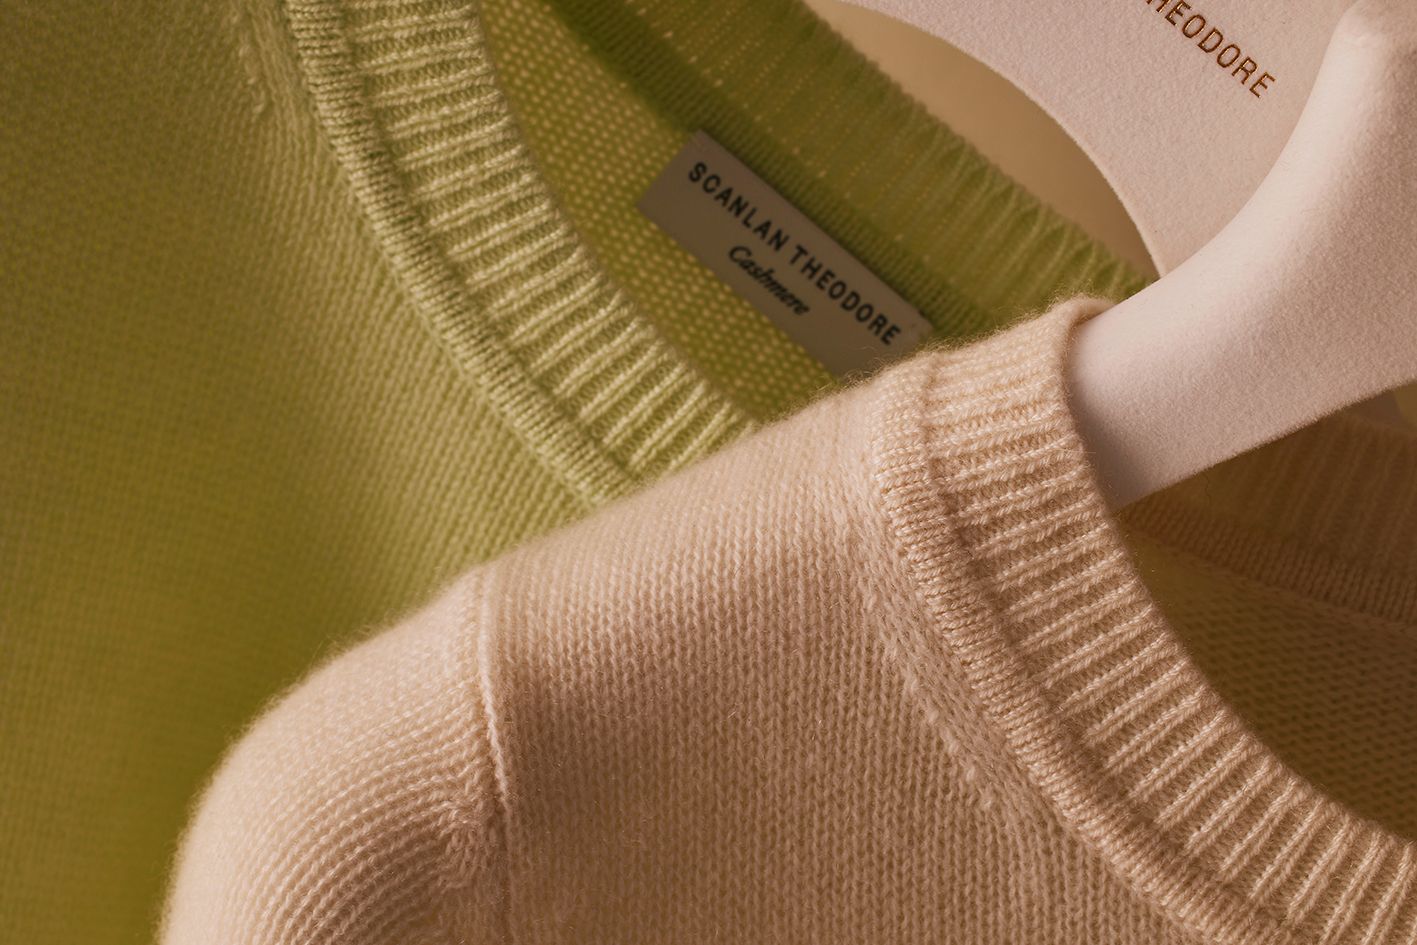 Scanlan Theodore cashmere with close detailed view of collar in soft sorbet tones.